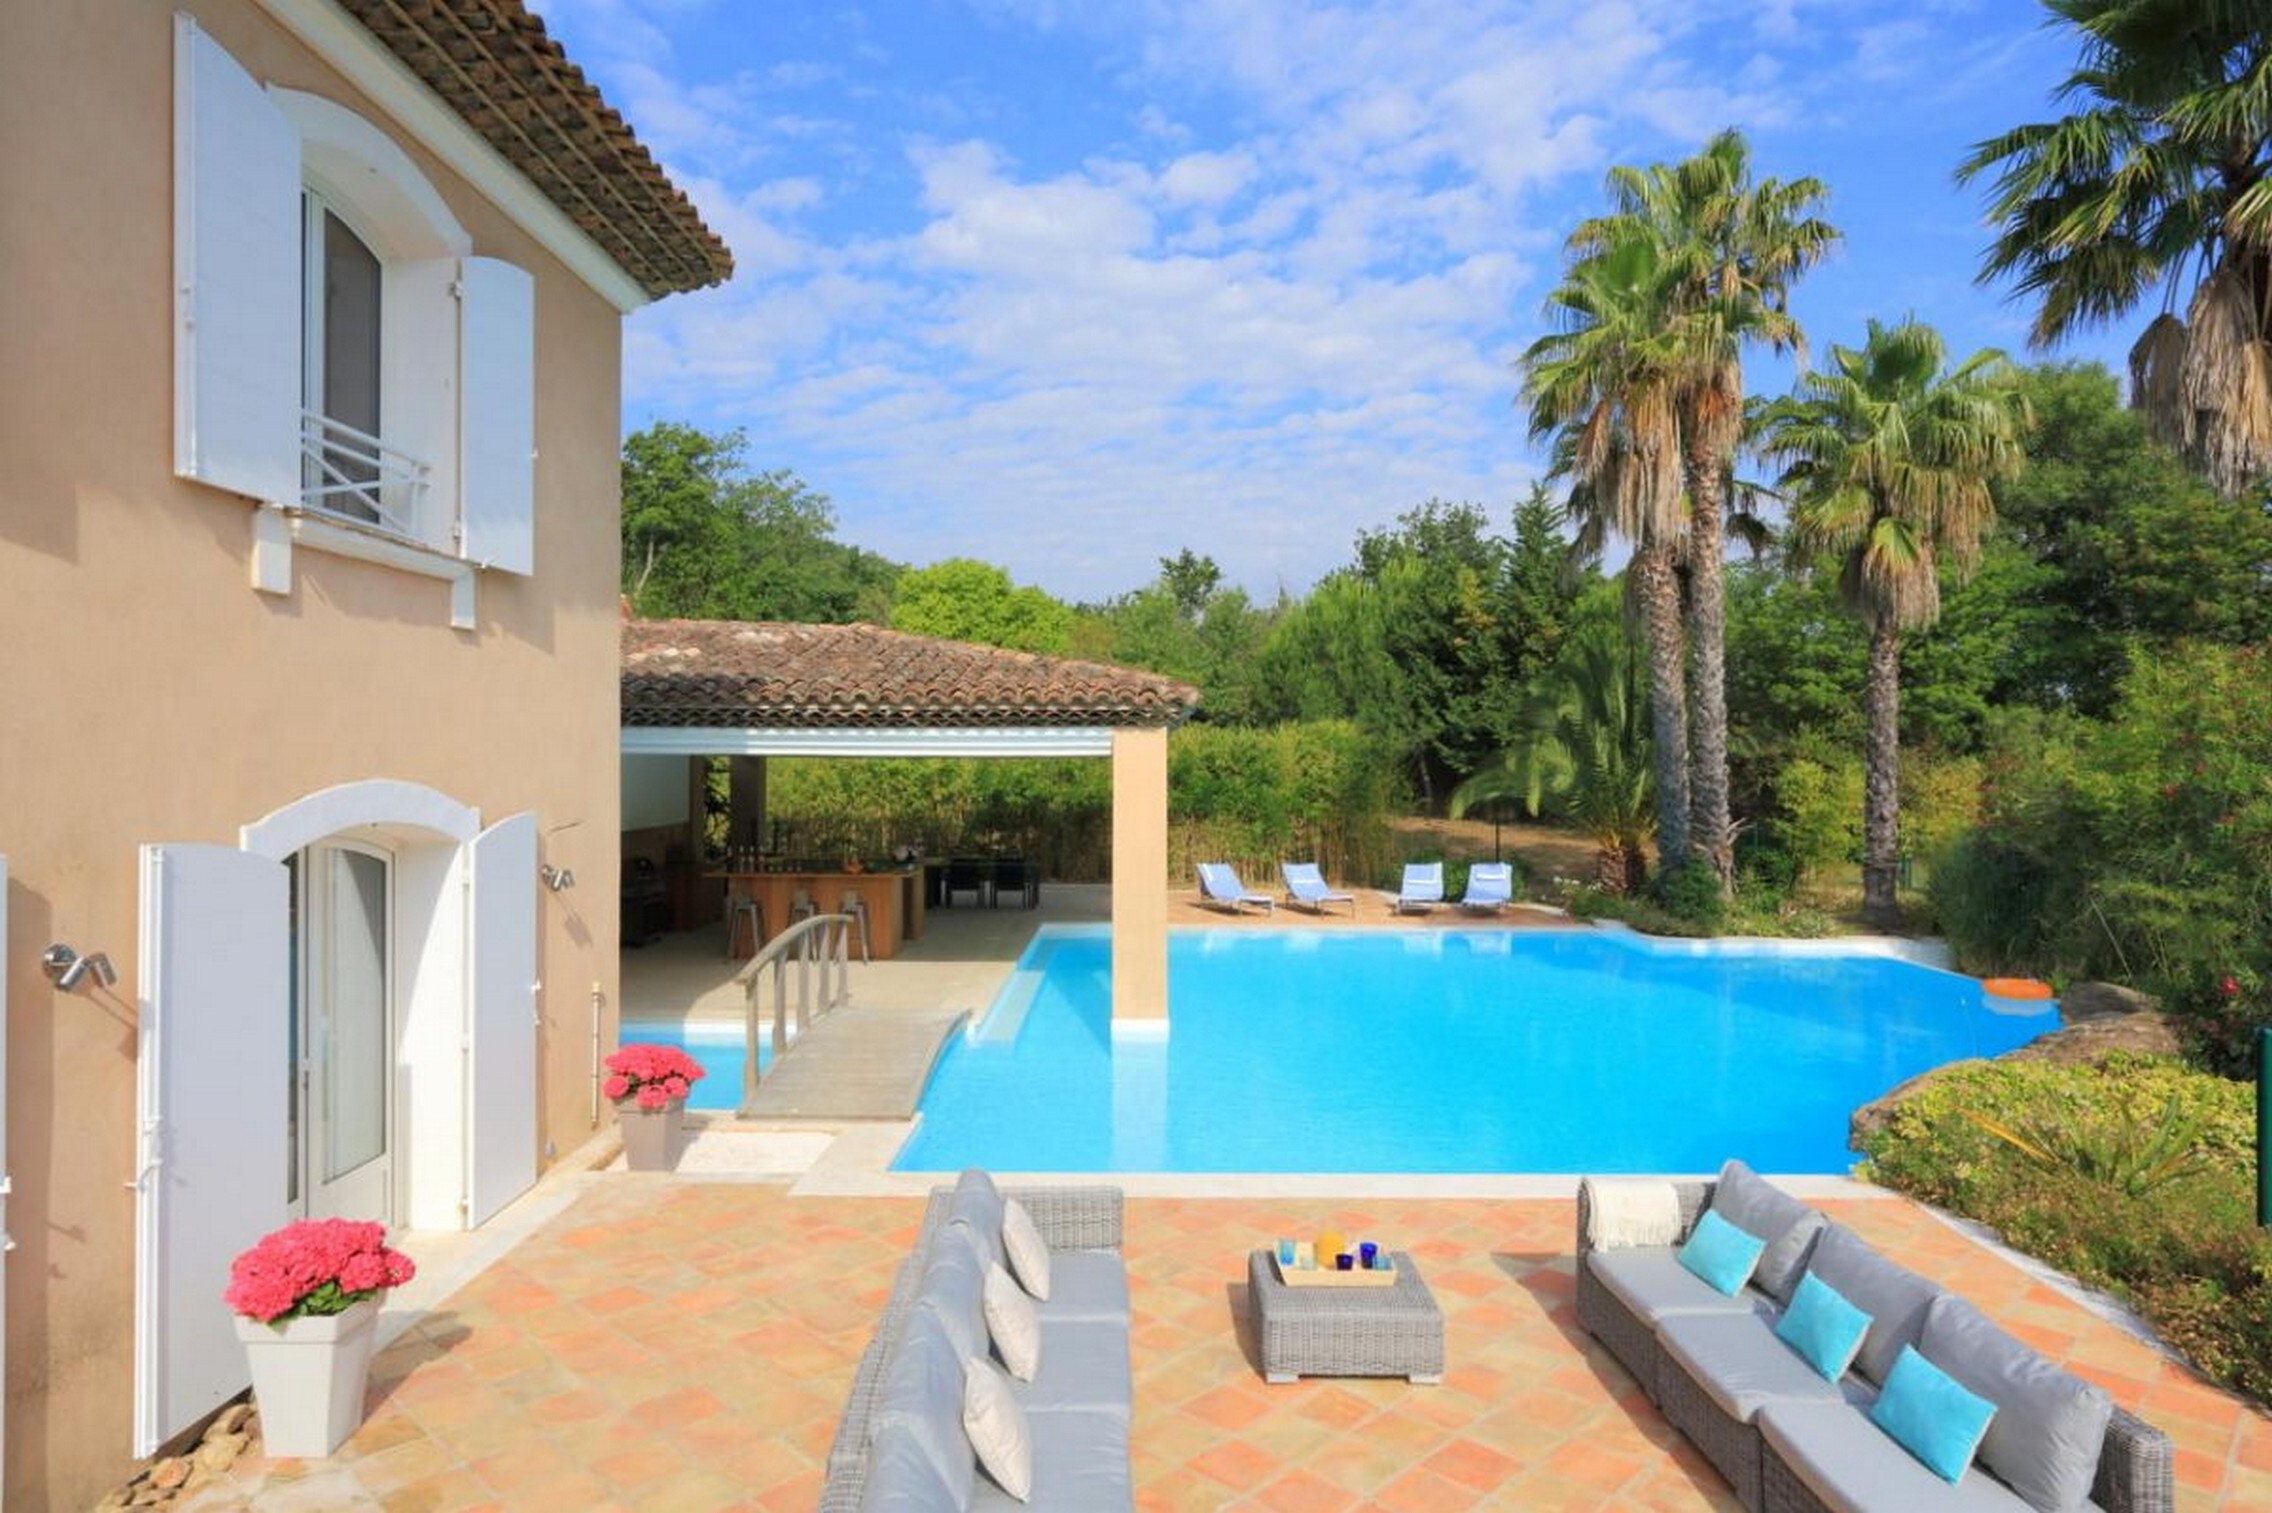 Property Image 1 - Fabulous 6 bedroom villa with heated infinity pool, AC and a large garden